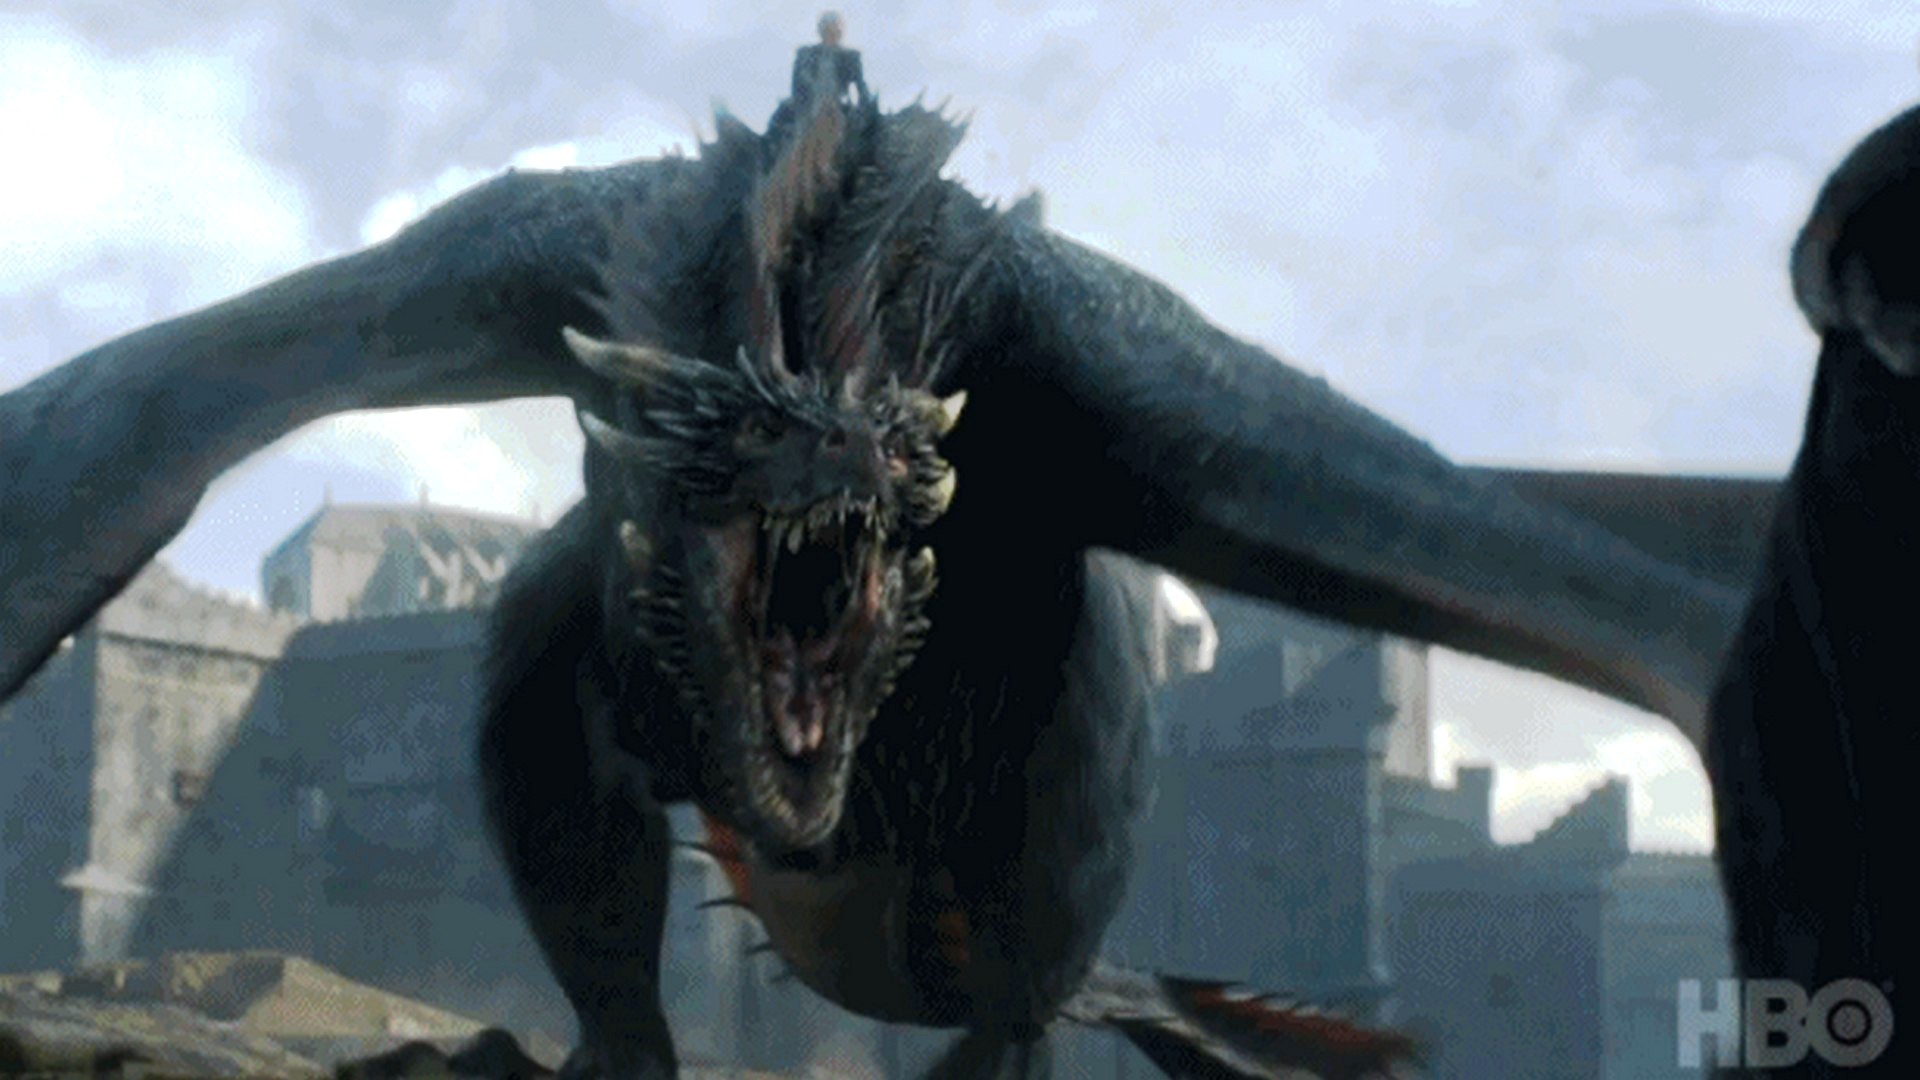 Game of Thrones Dragons Poster Wallpaper with high-resolution 1920x1080 pixel. You can use this poster wallpaper for your Desktop Computers, Mac Screensavers, Windows Backgrounds, iPhone Wallpapers, Tablet or Android Lock screen and another Mobile device